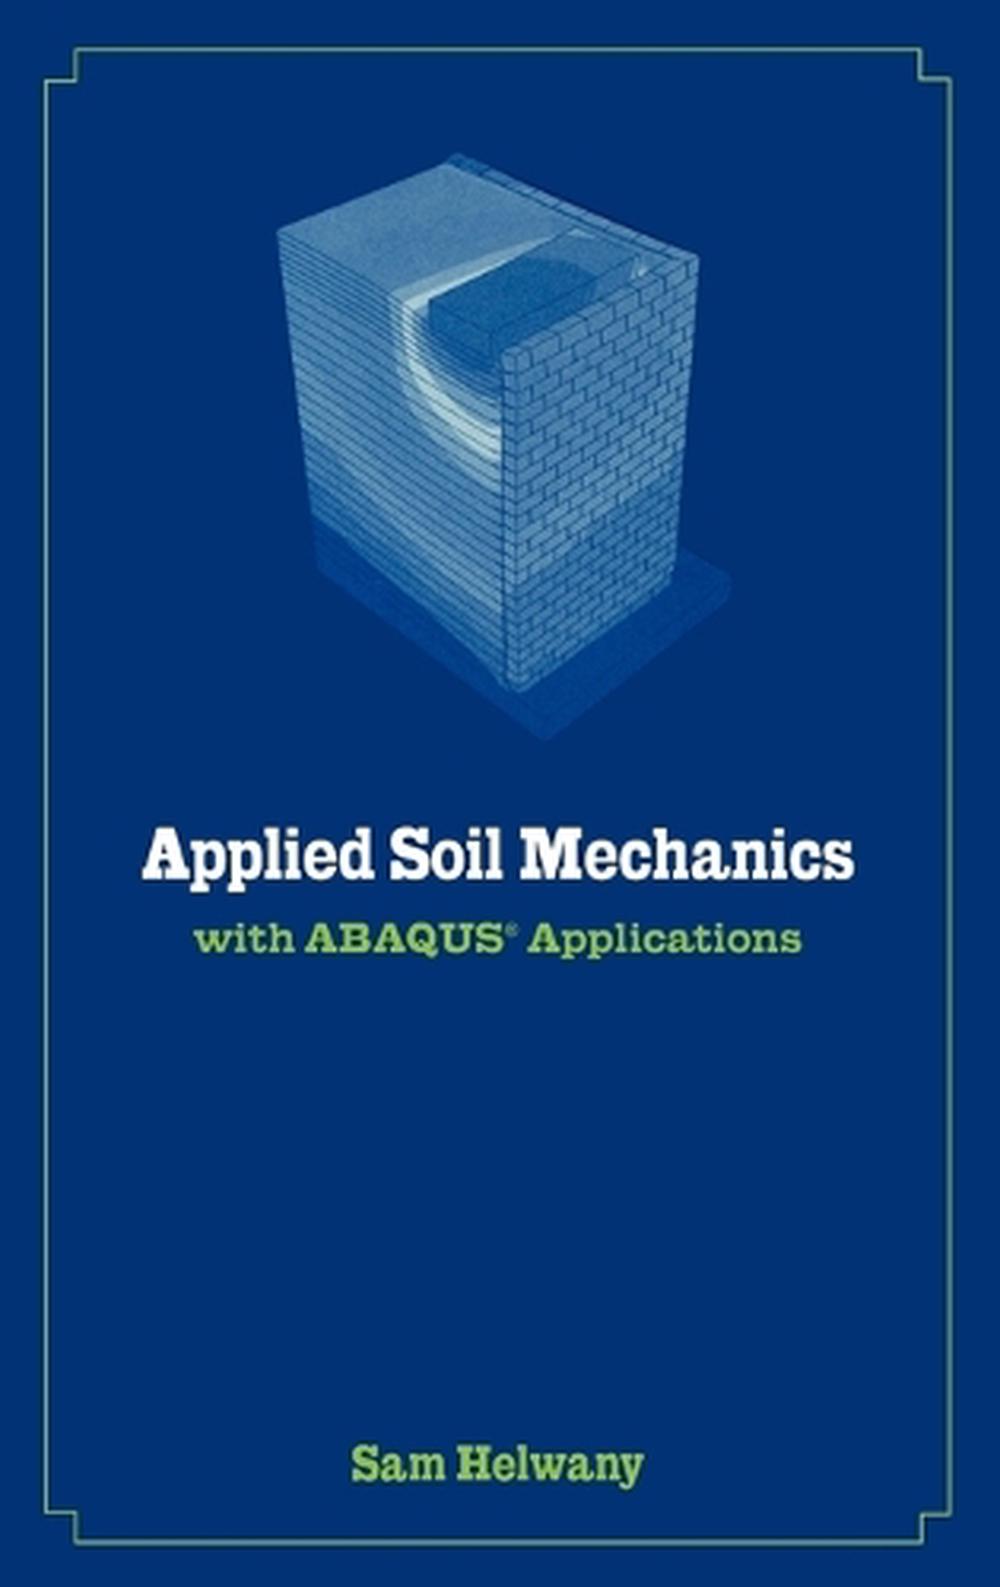 Applied Soil Mechanics with ABAQUS Applications by Sam Helwany (English